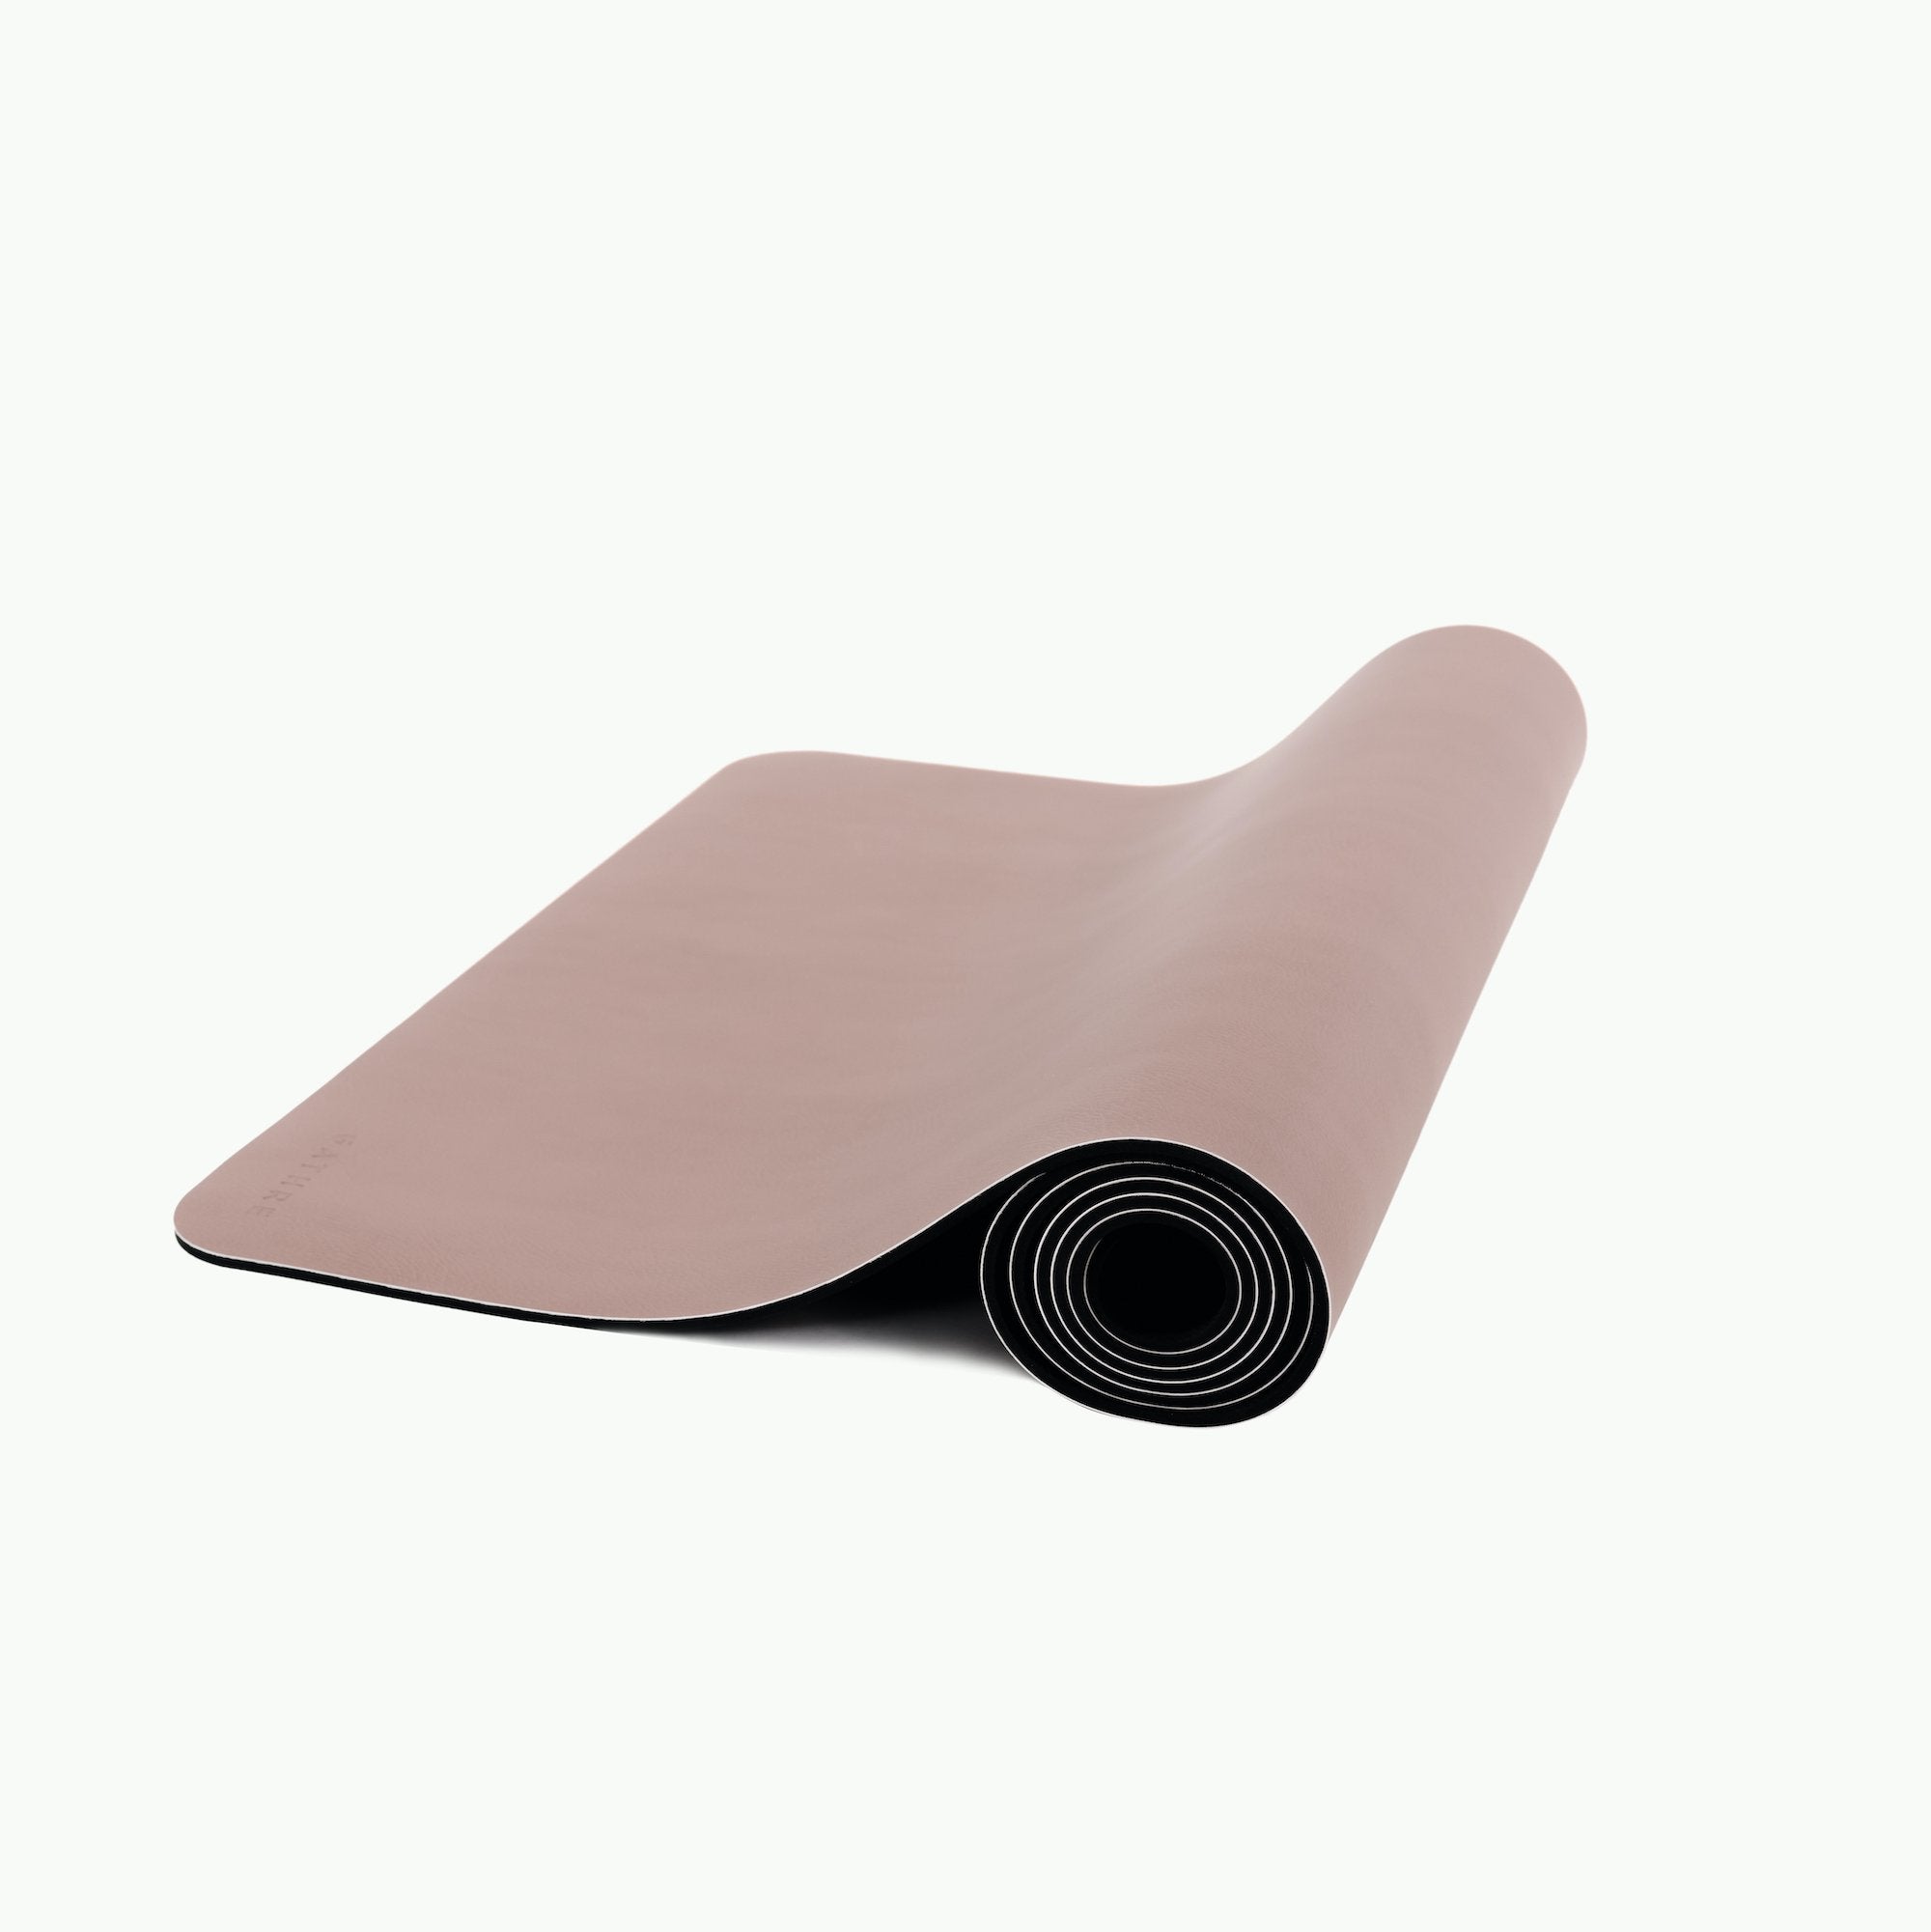 Currant (on sale)@The small currant home mat rolled up